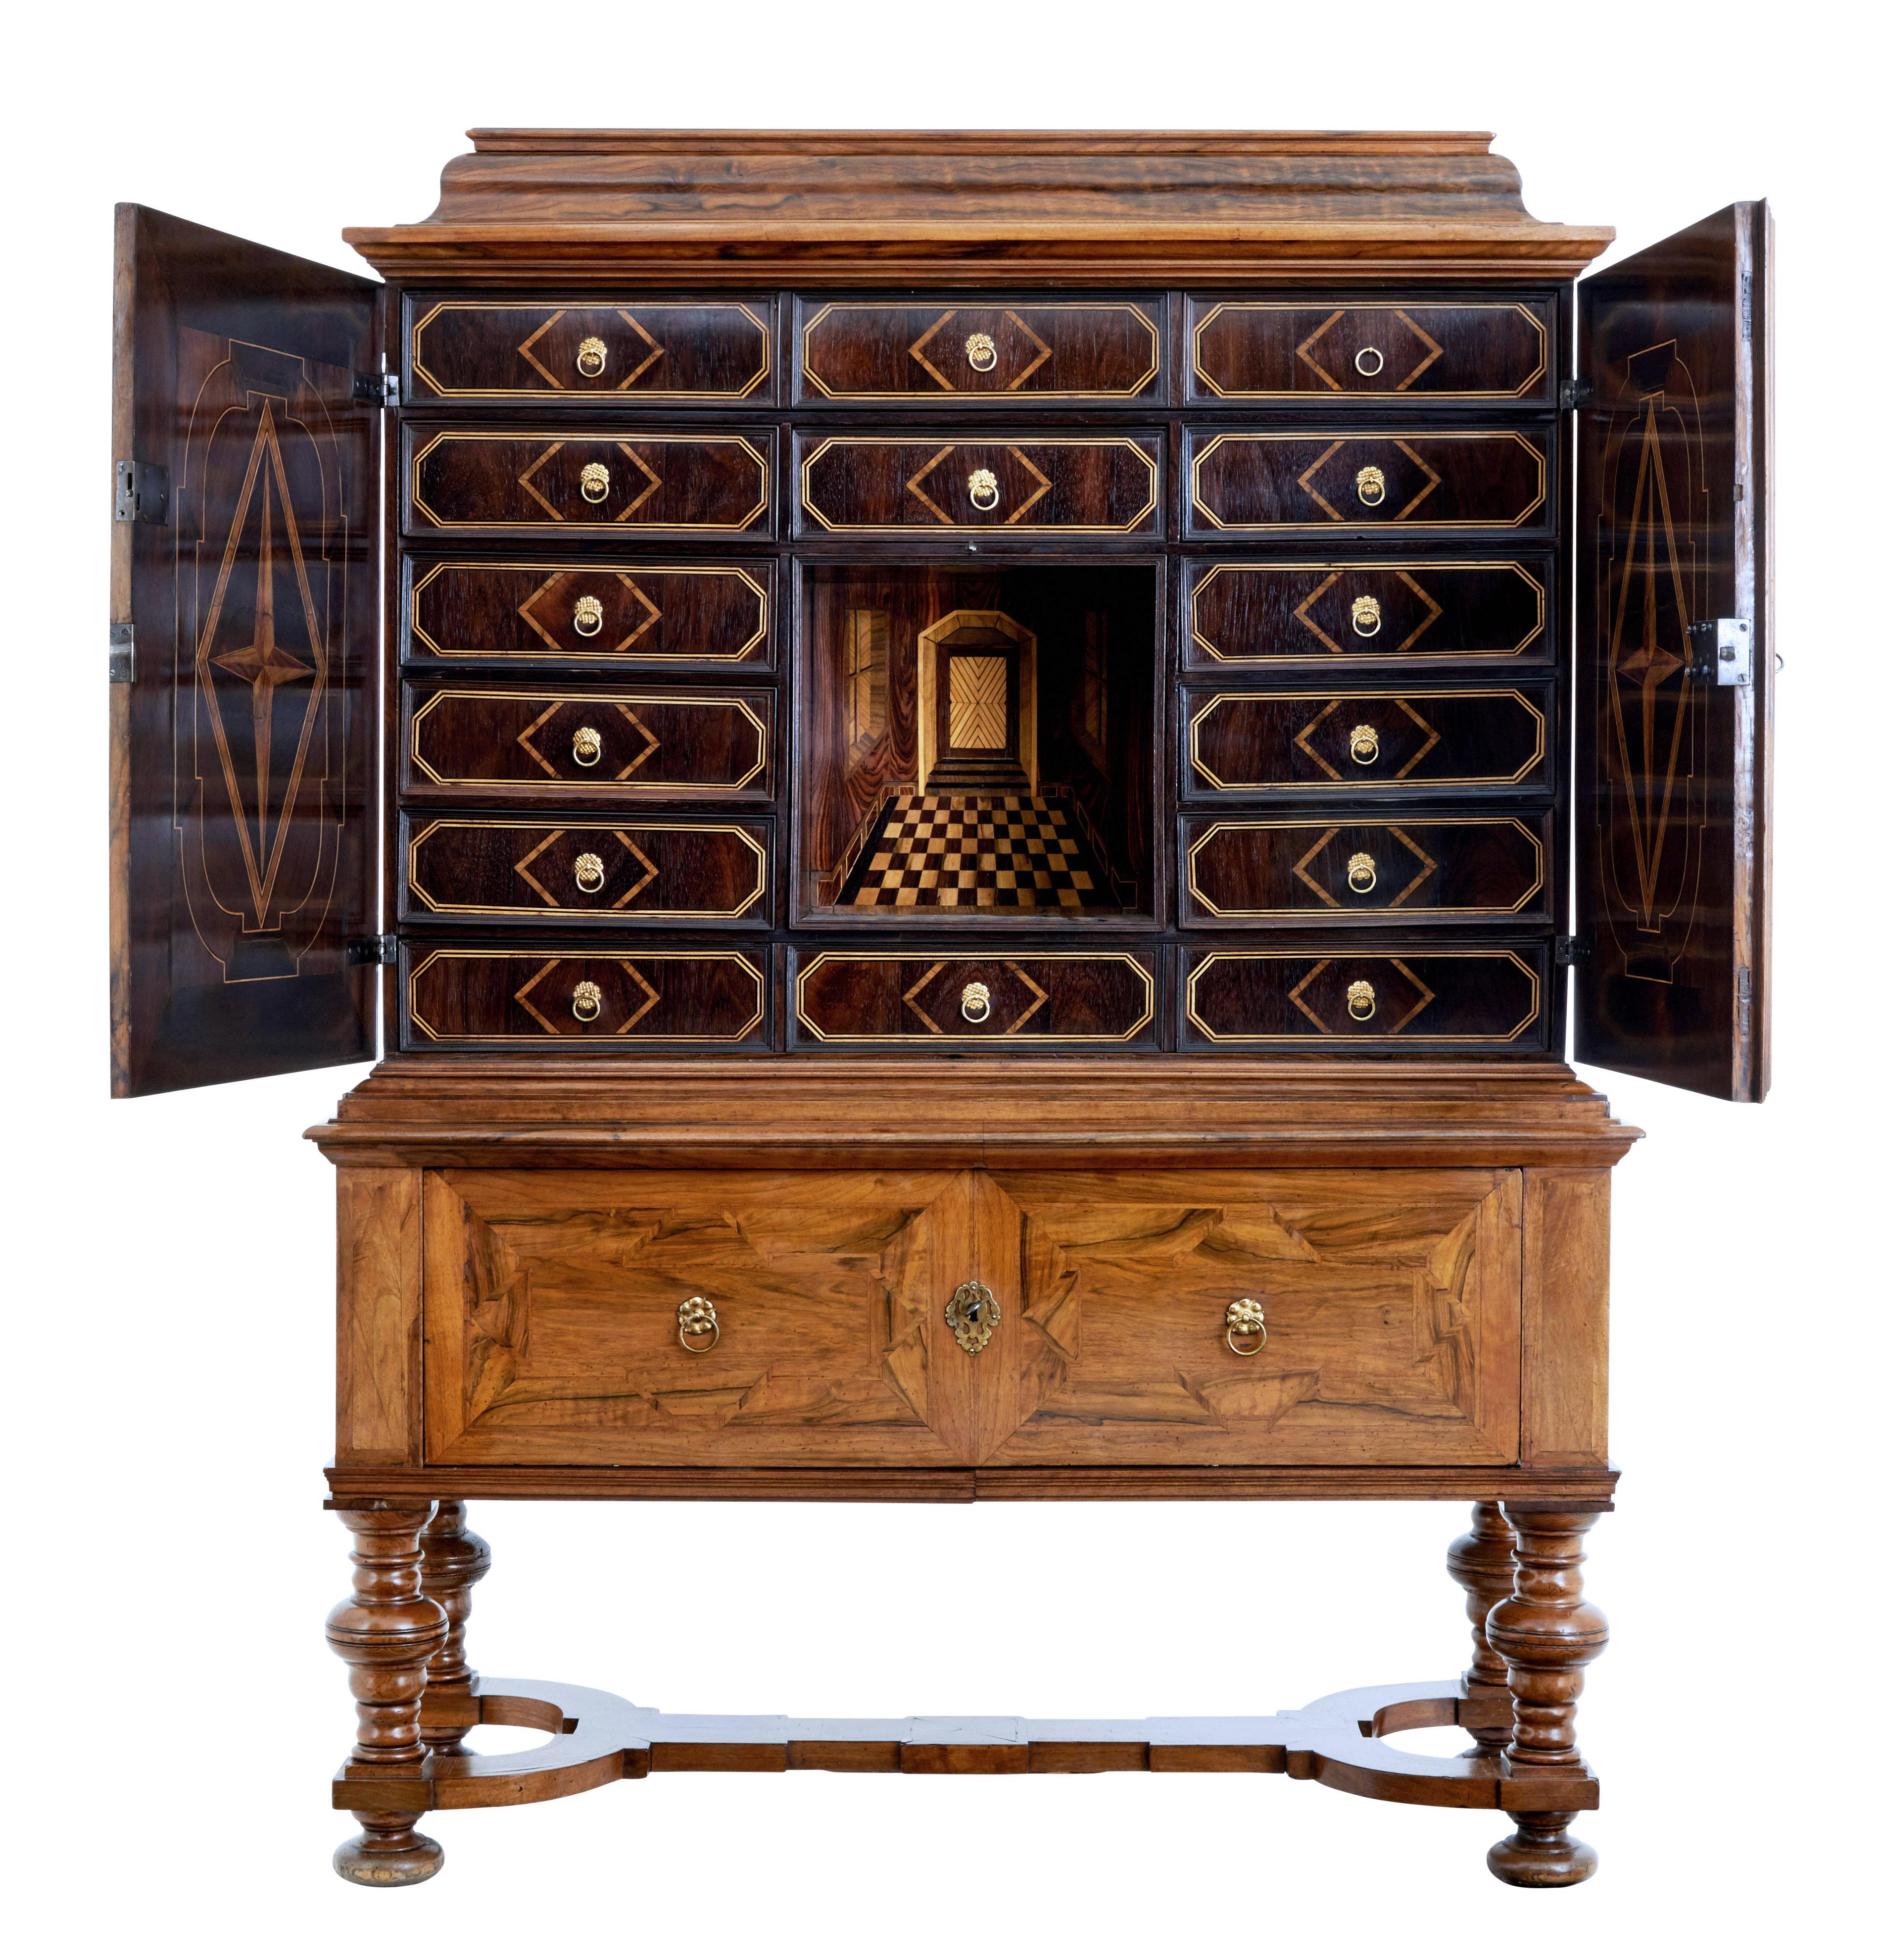 Rare and fine quality baroque period walnut cabinet on stand, circa 1710.

Comprising of 2 sections, top section with secret compartment in the cornice which opens to reveal an open deep storage aperture, finished with an inlaid hinged door.